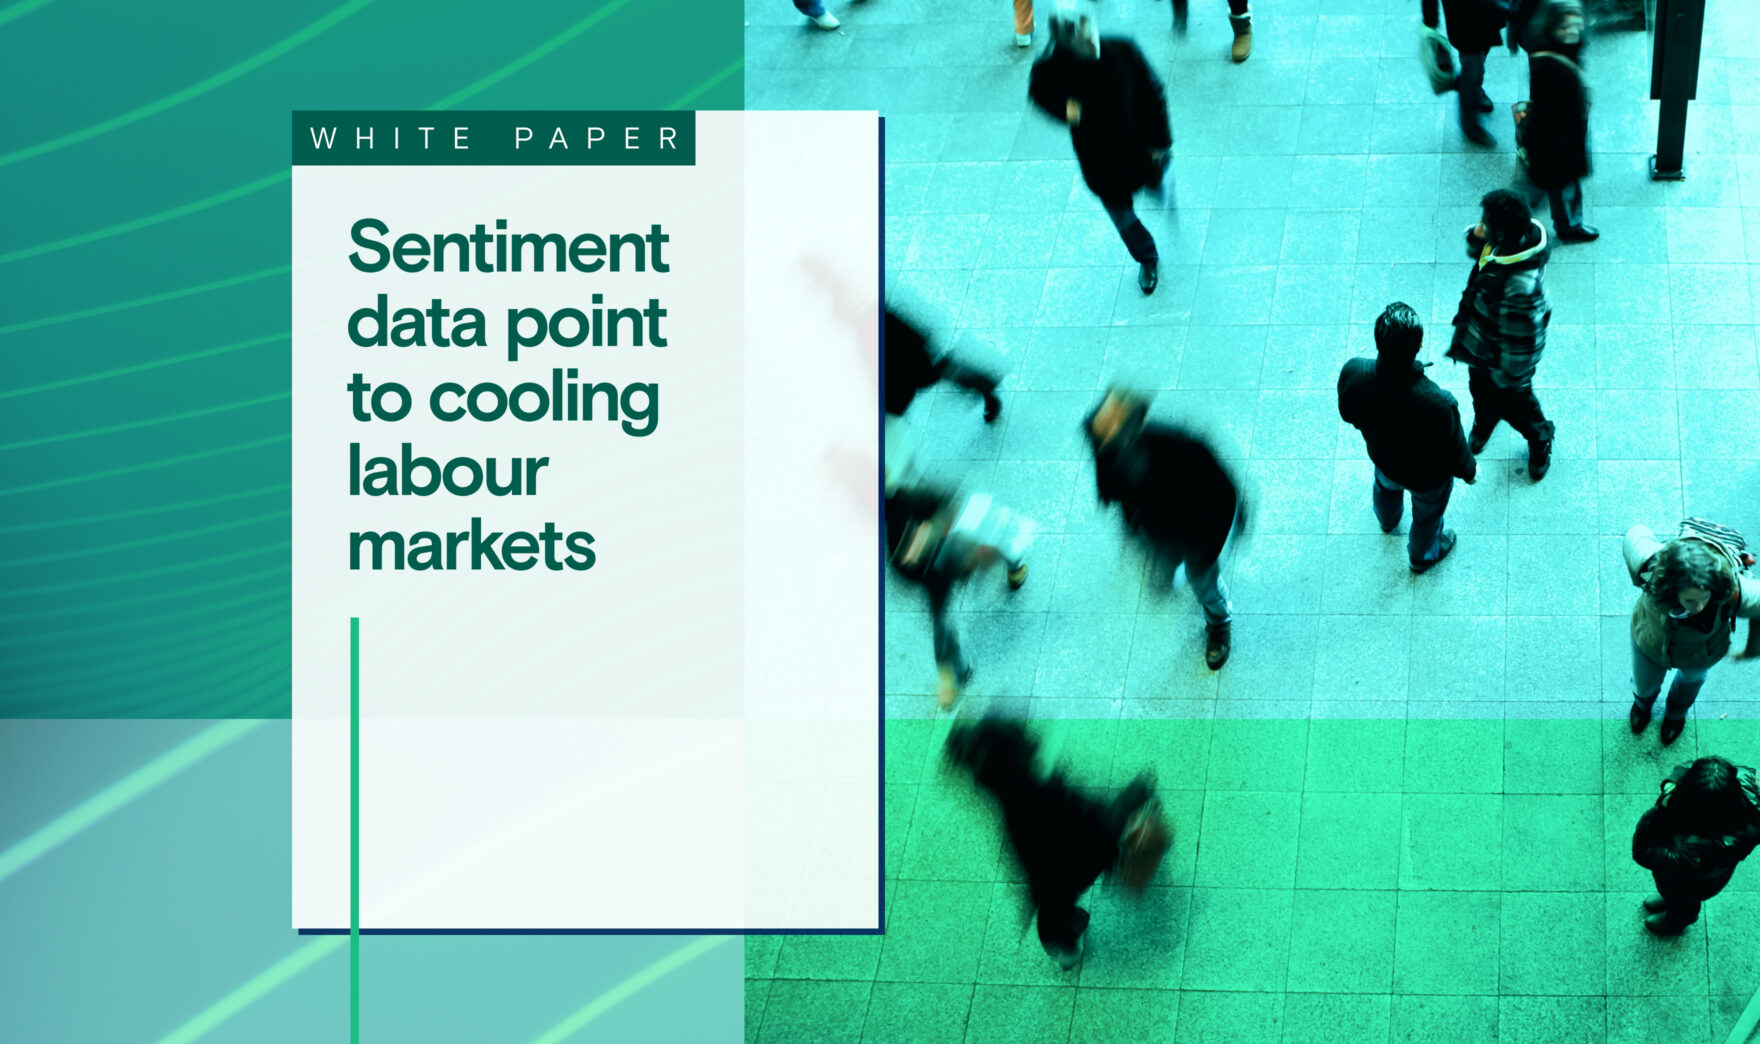 White paper: Sentiment data point to cooling labor markets